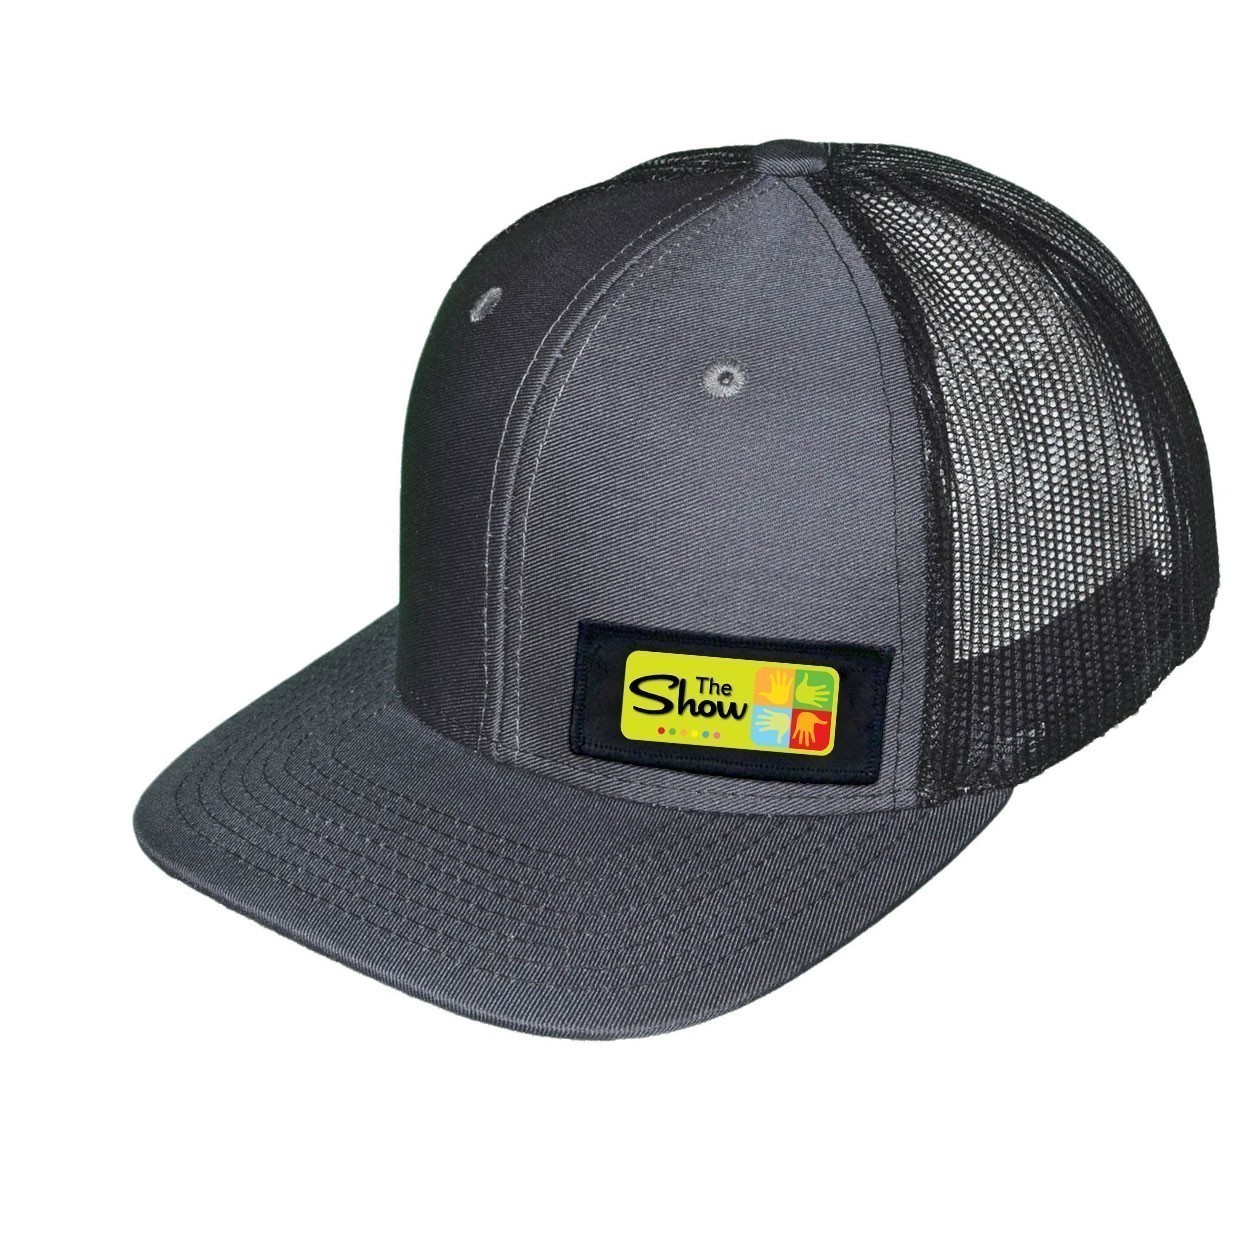 The Show Art Gallery Night Out Woven Patch Snapback Trucker Hat Dark Gray/Black (White Logo)